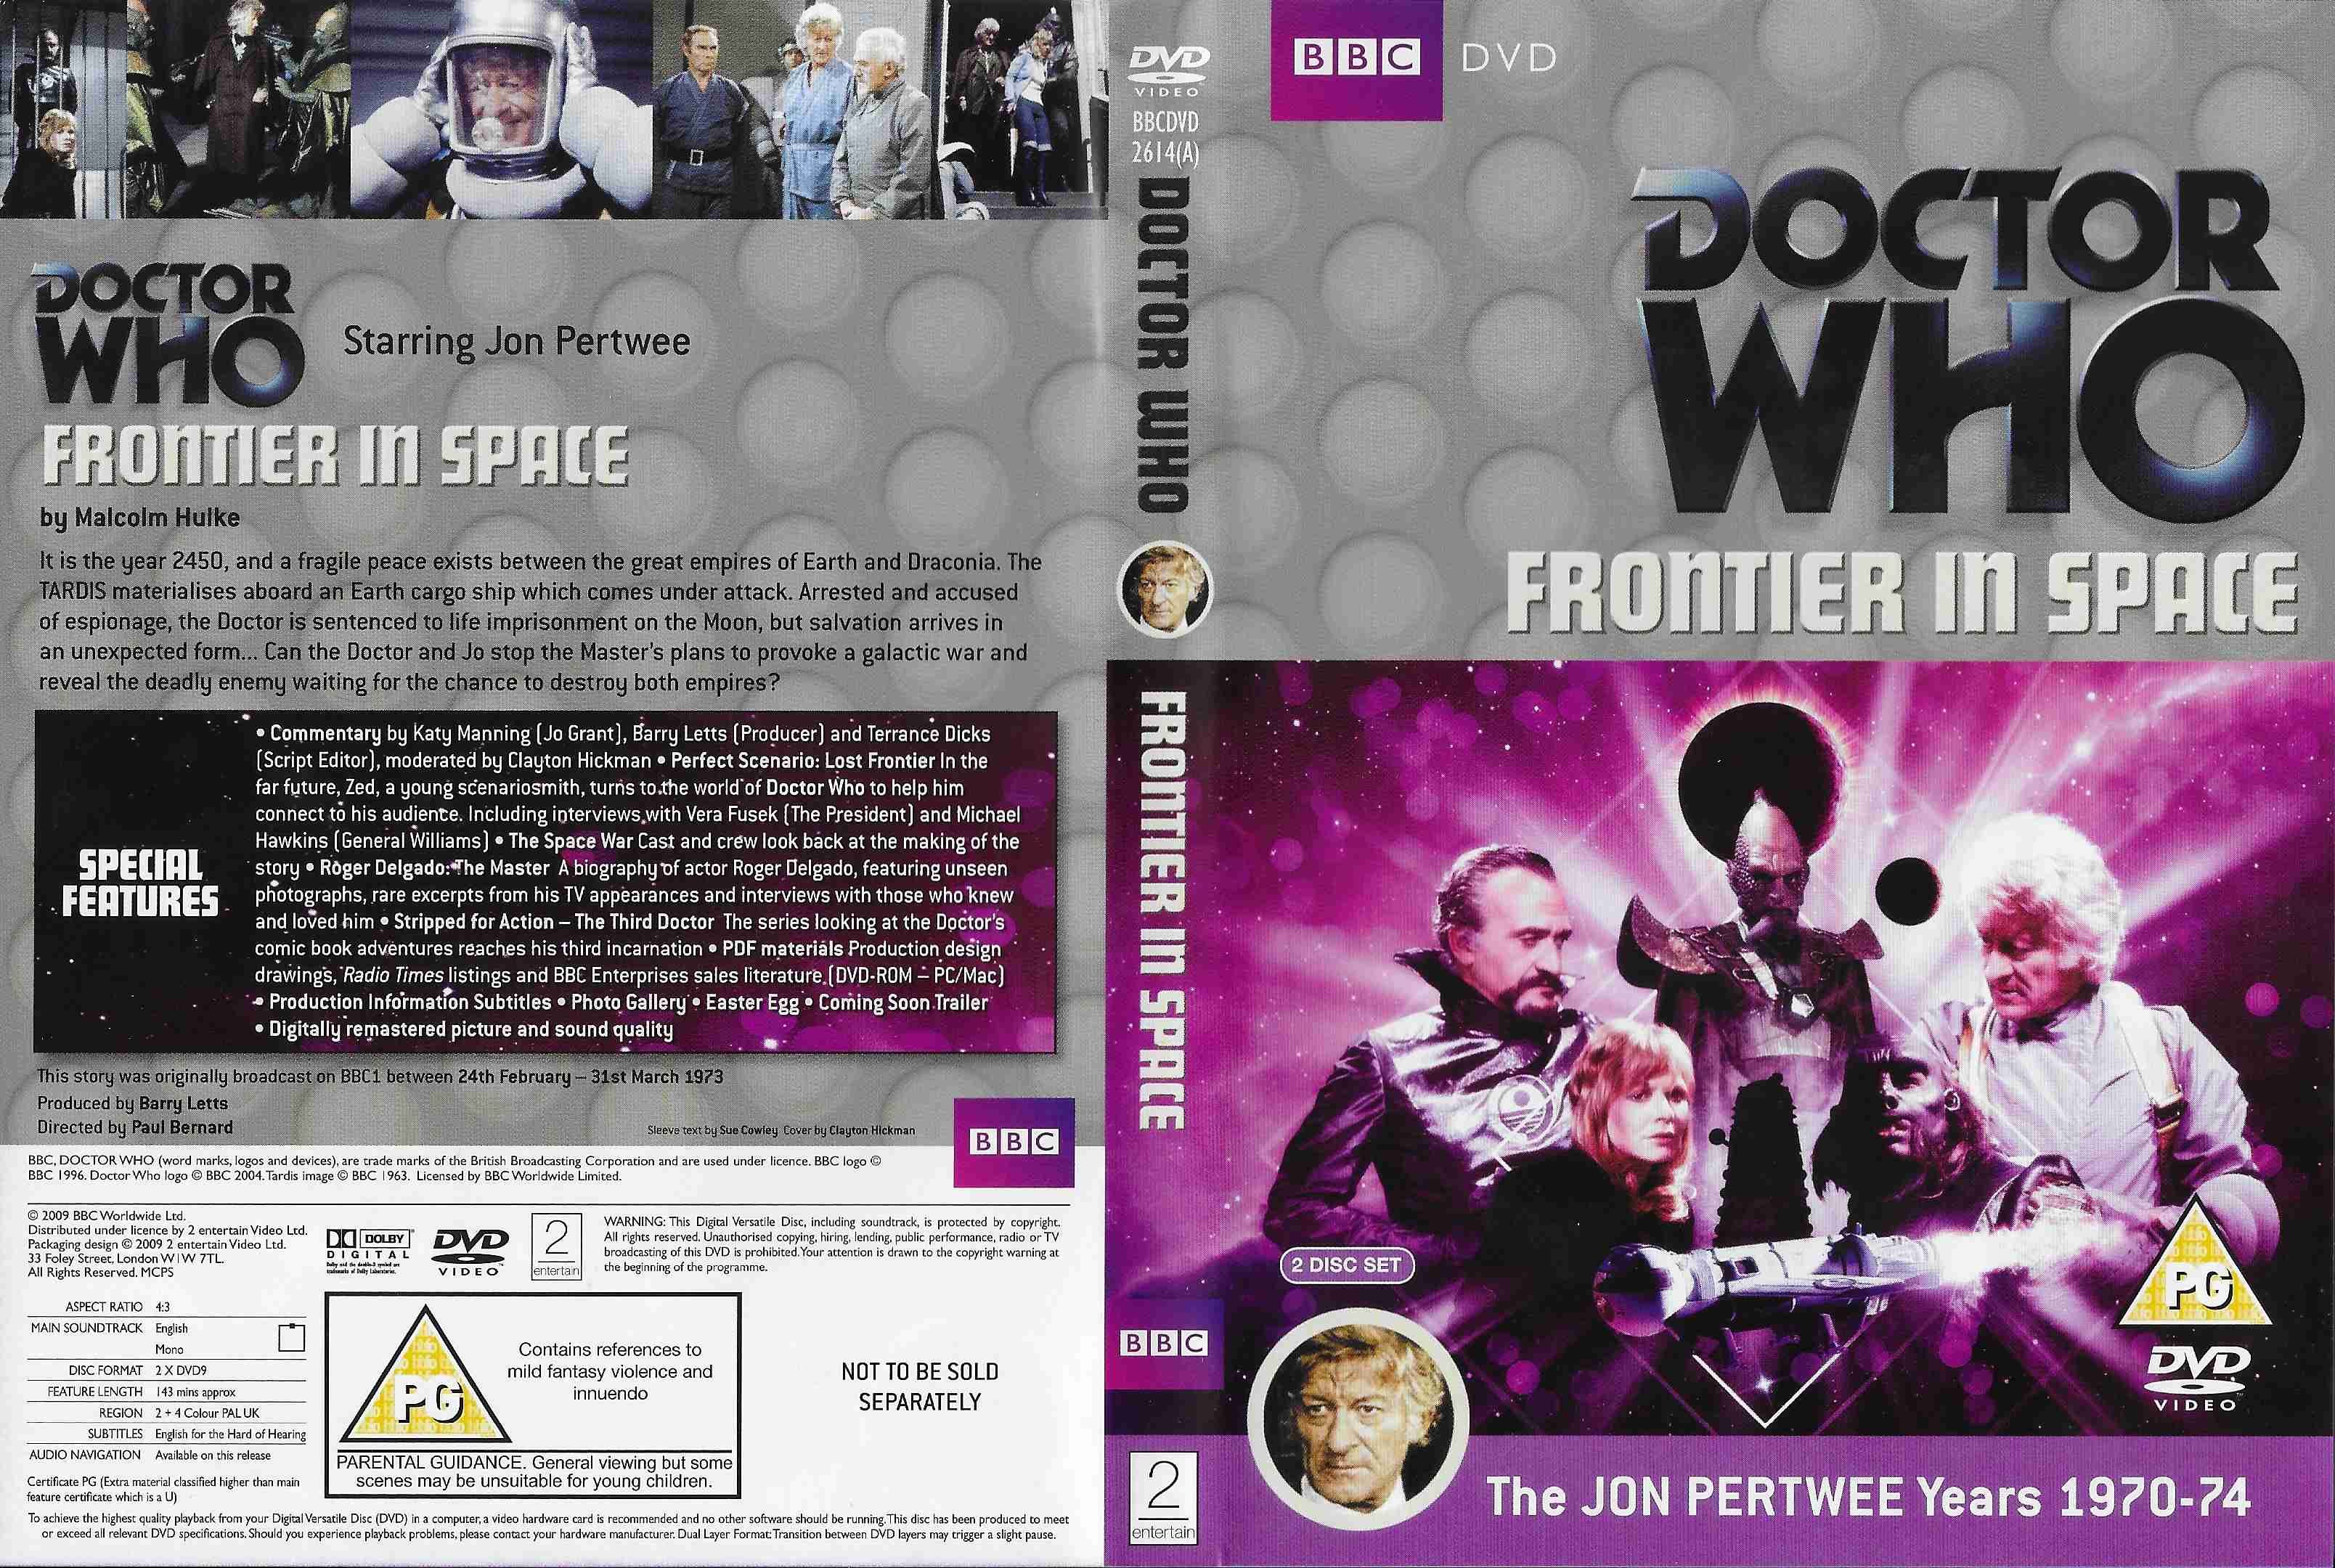 Picture of BBCDVD 2614A Doctor Who - Frontier in space by artist Malcolm Hulke from the BBC records and Tapes library